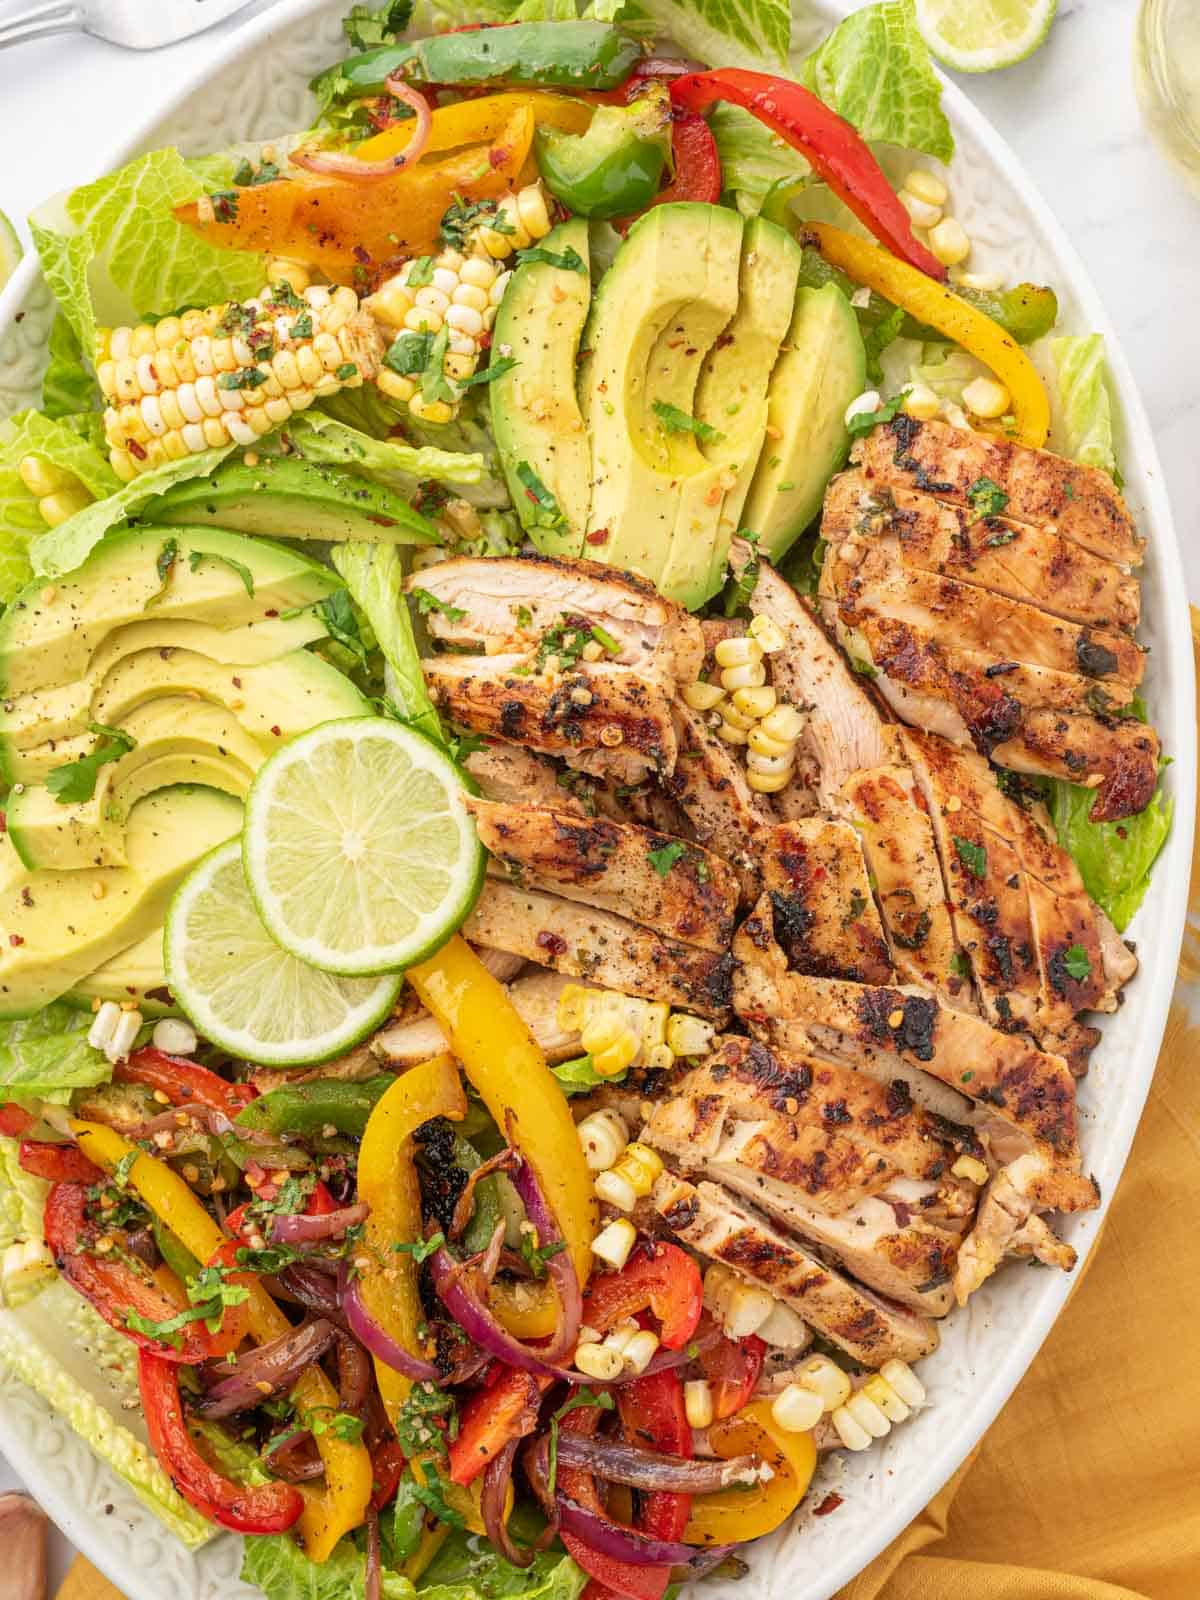 Fiesta lime chicken salad with lime garnish on a platter.